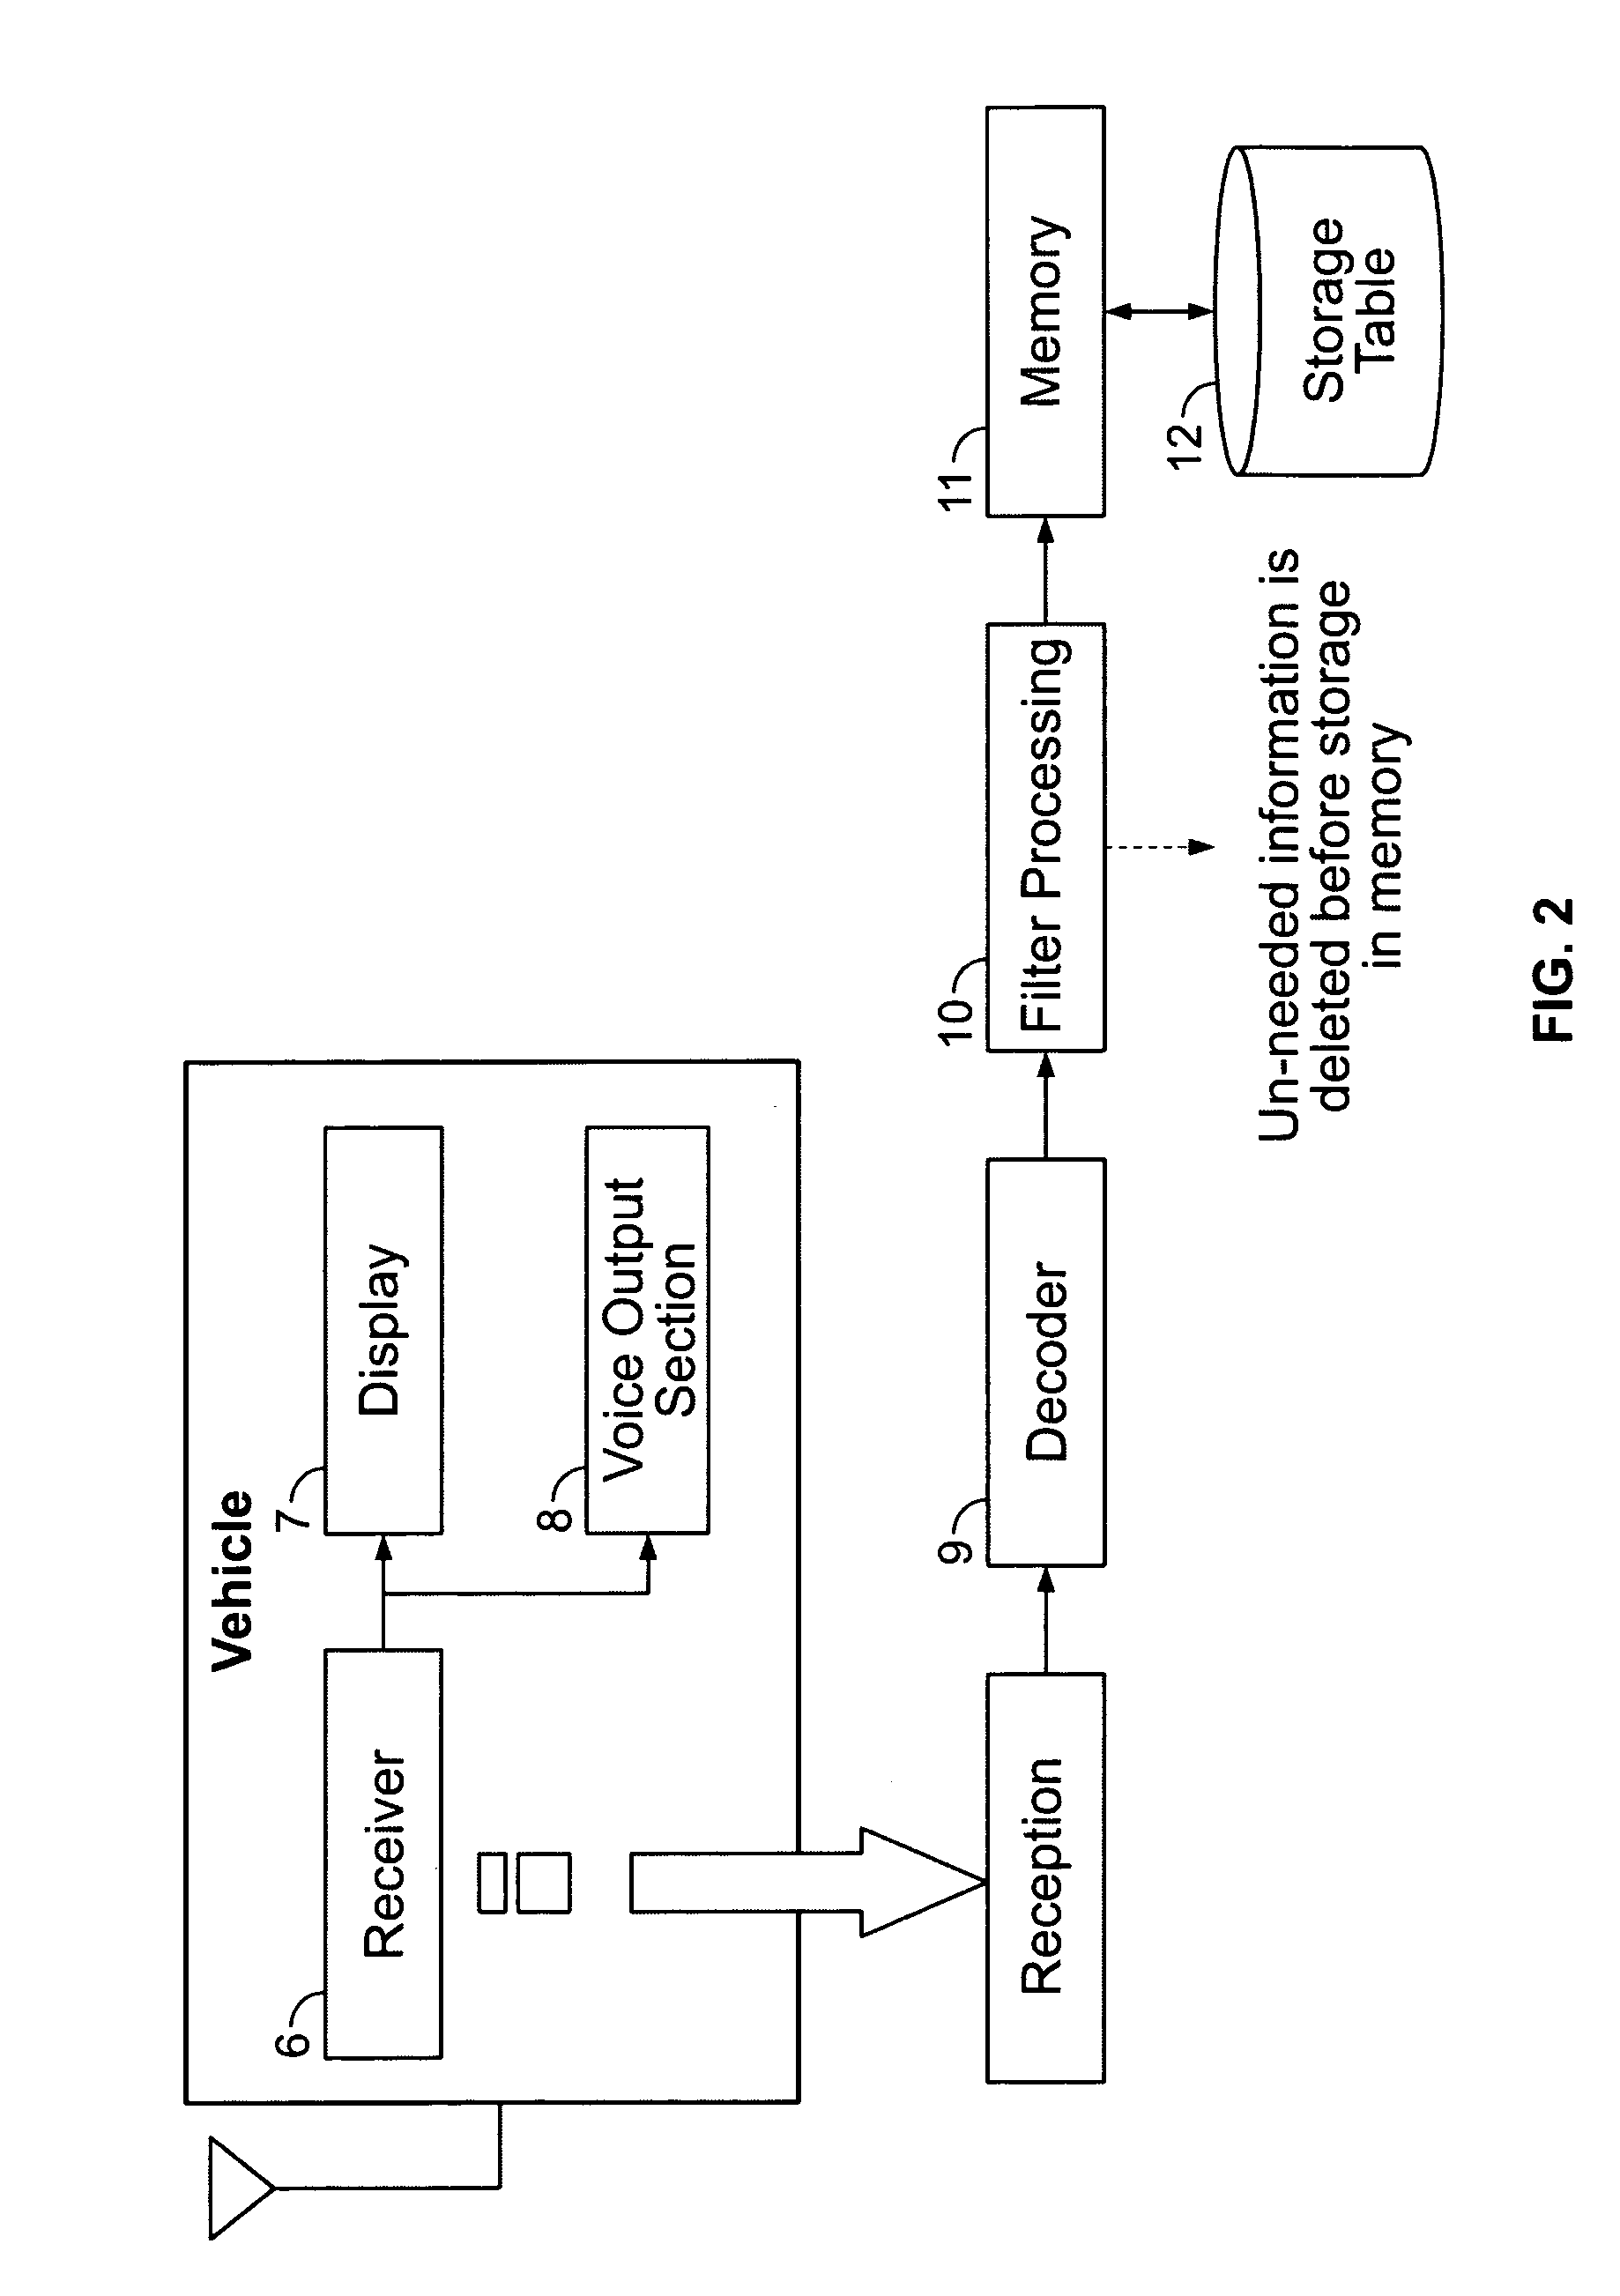 Method and system for broadcasting data messages to a vehicle